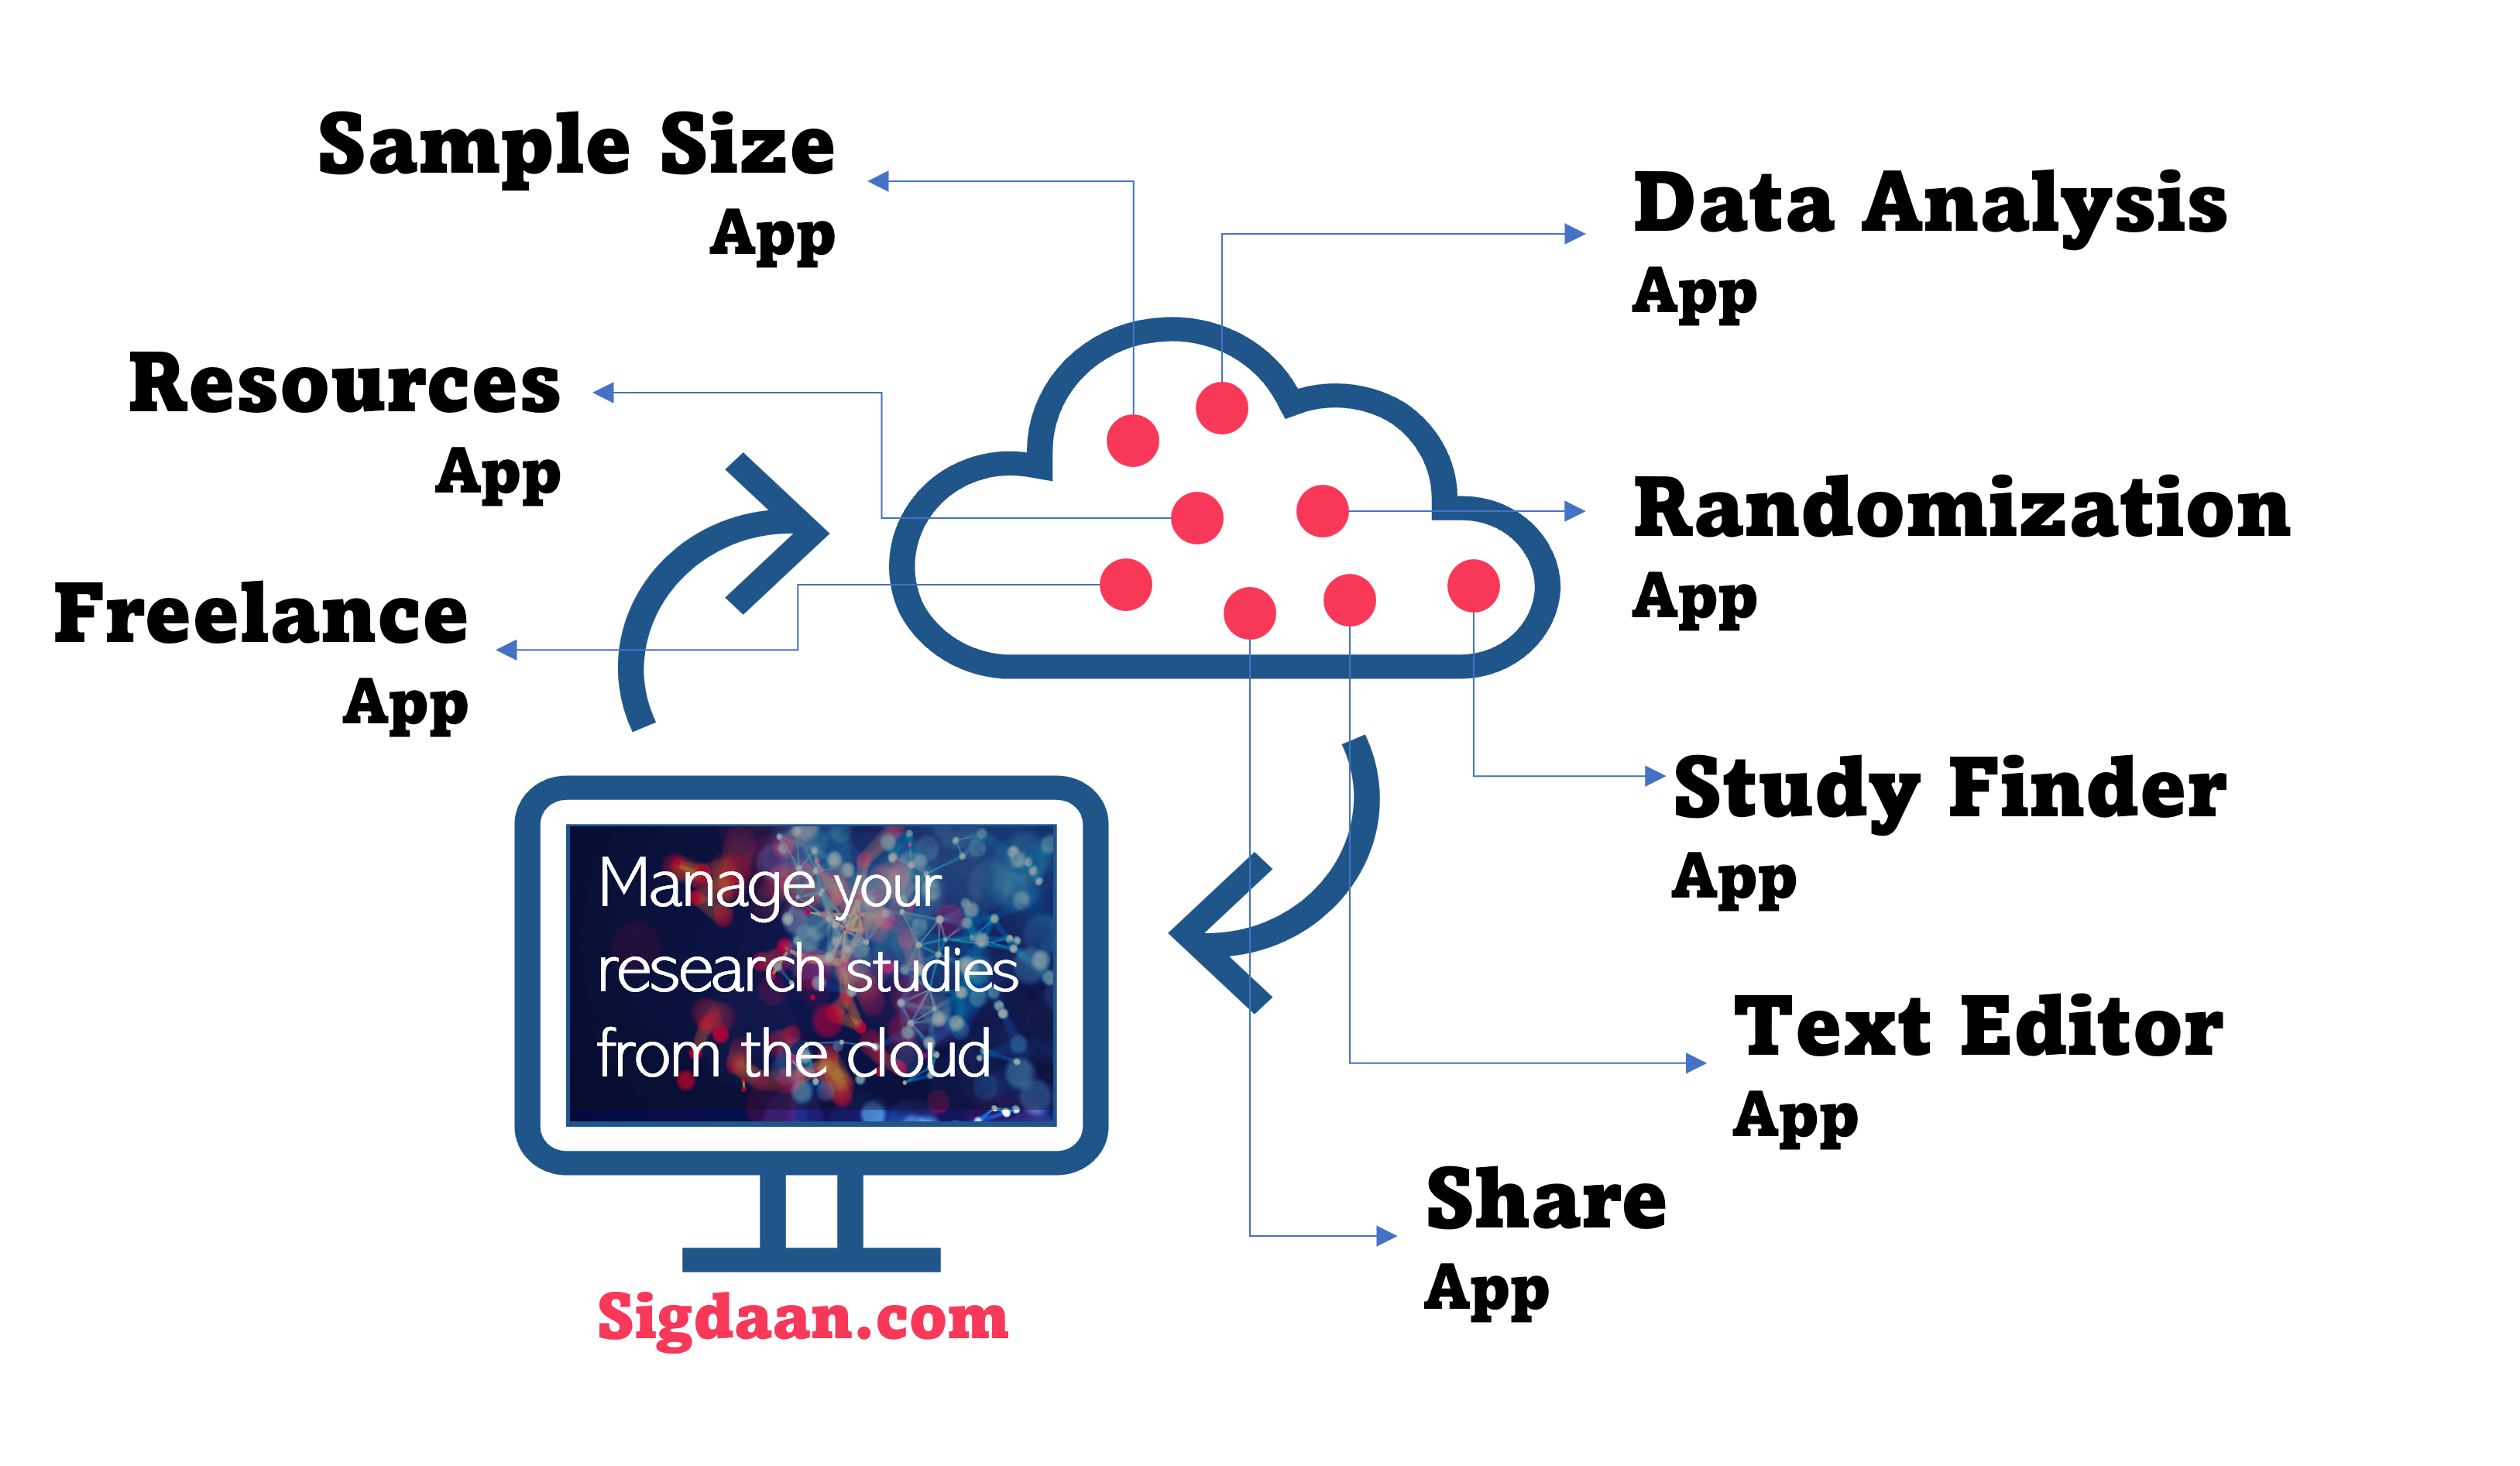 Sigdaan All-in-one Platform to manage Research Studies from the Cloud